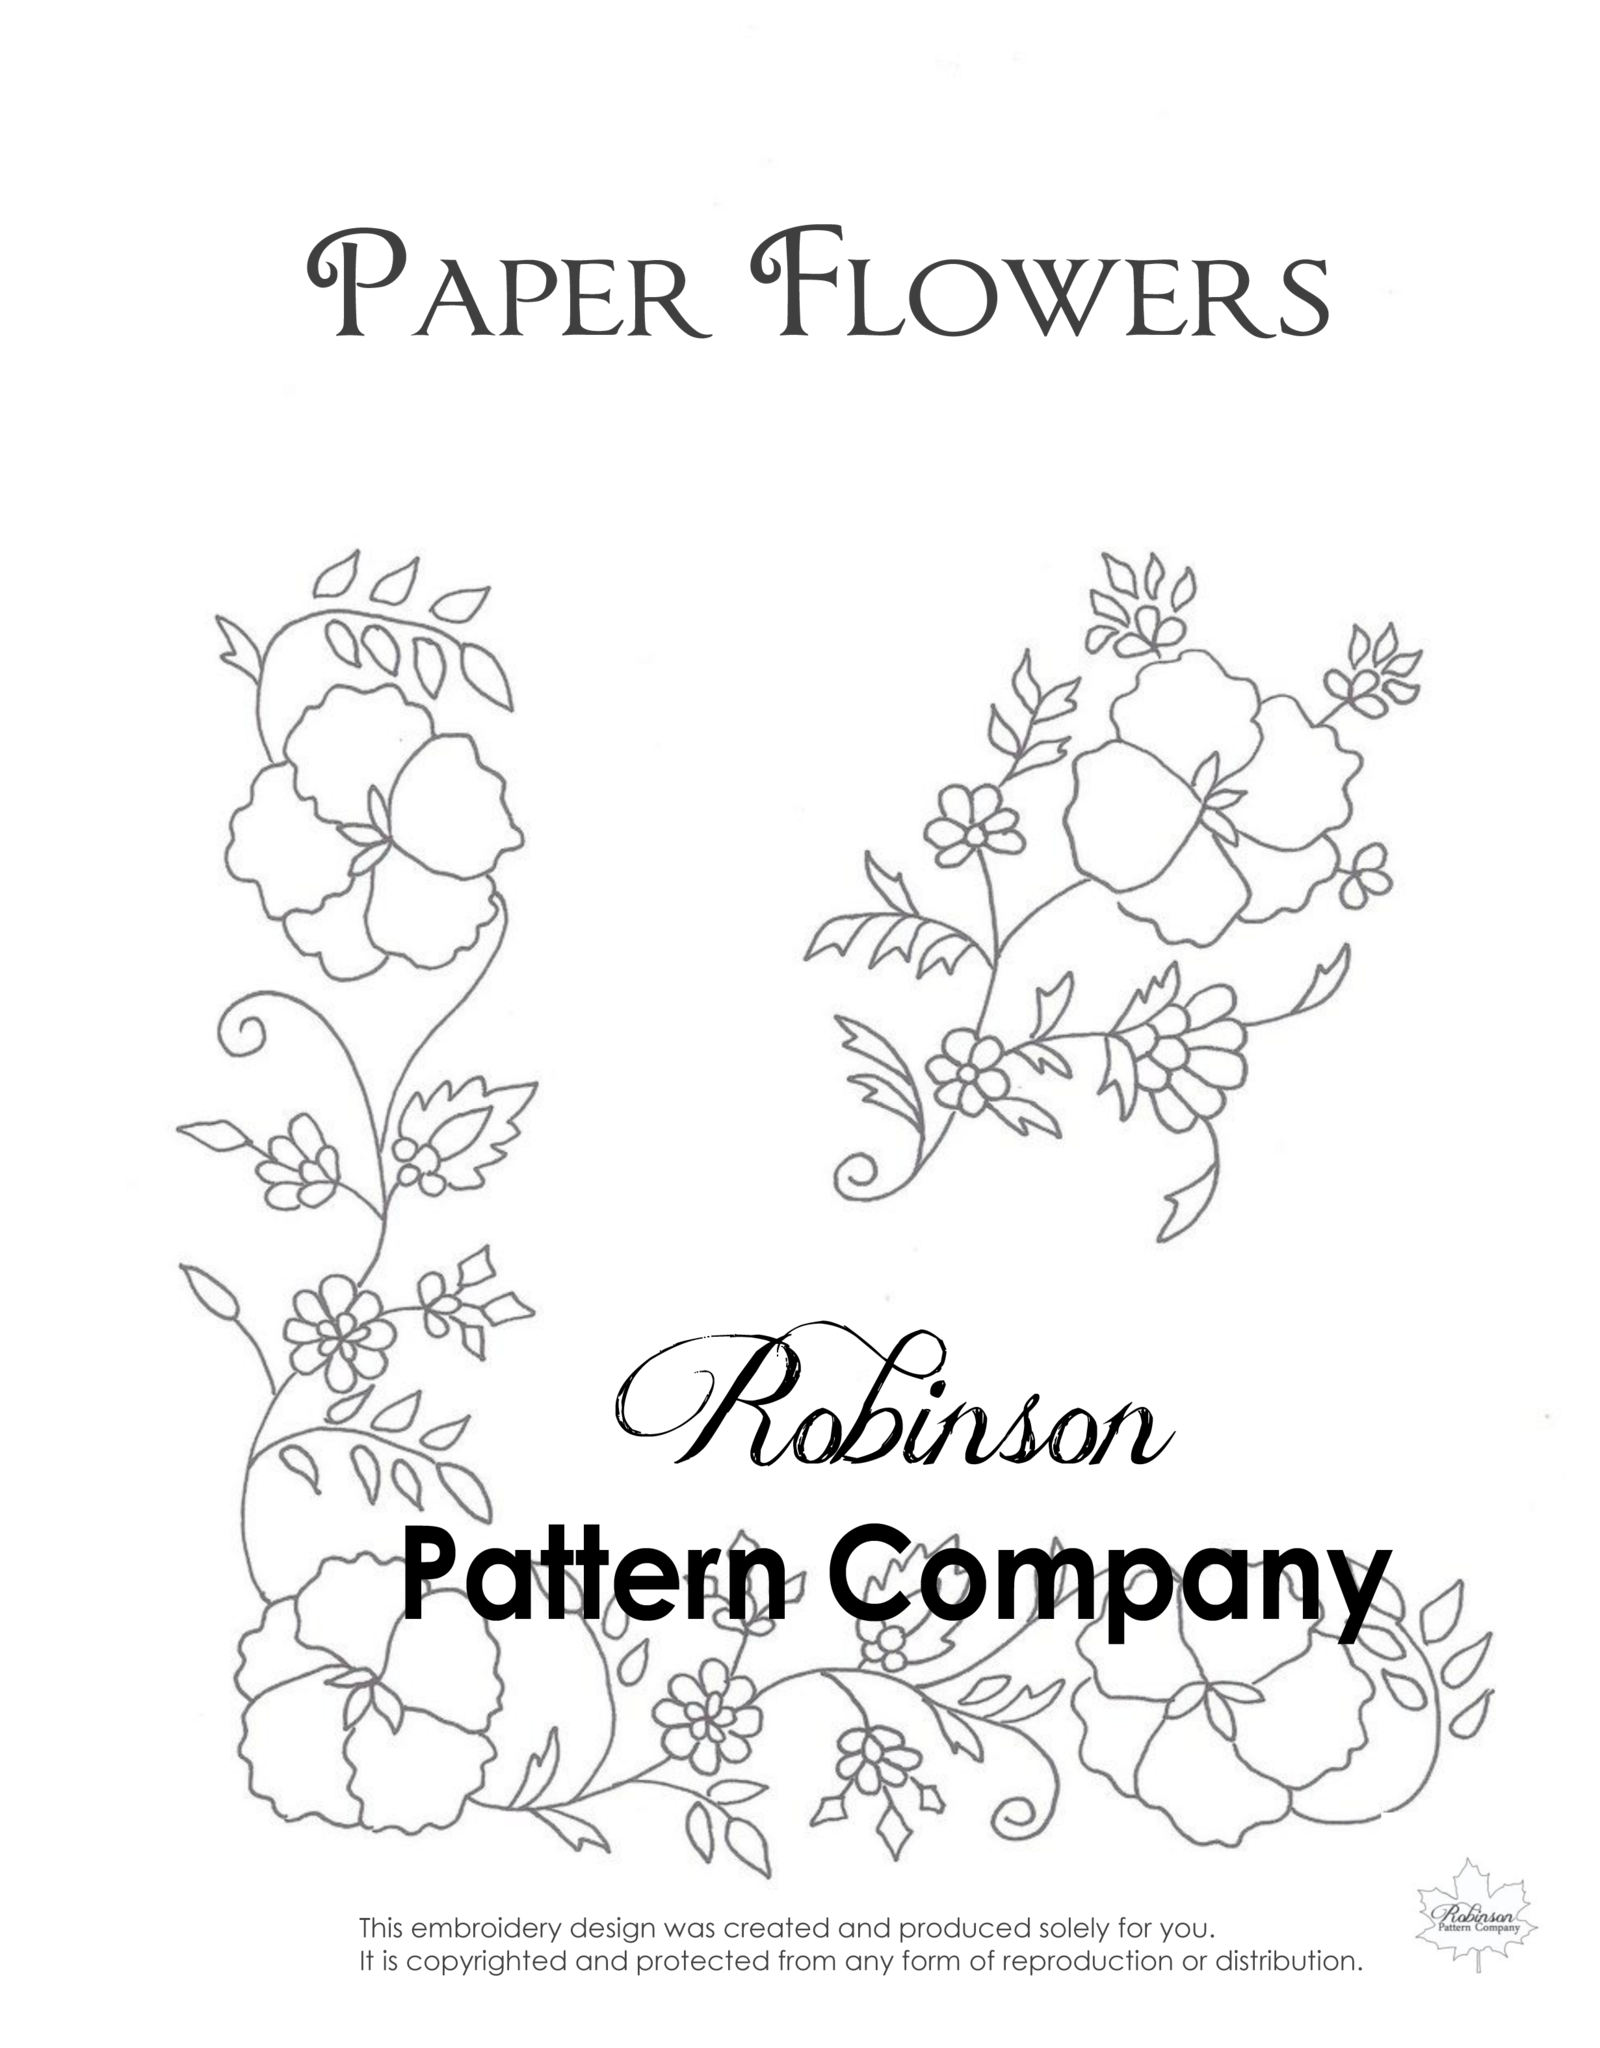 Paper Flowers Hand Embroidery pattern